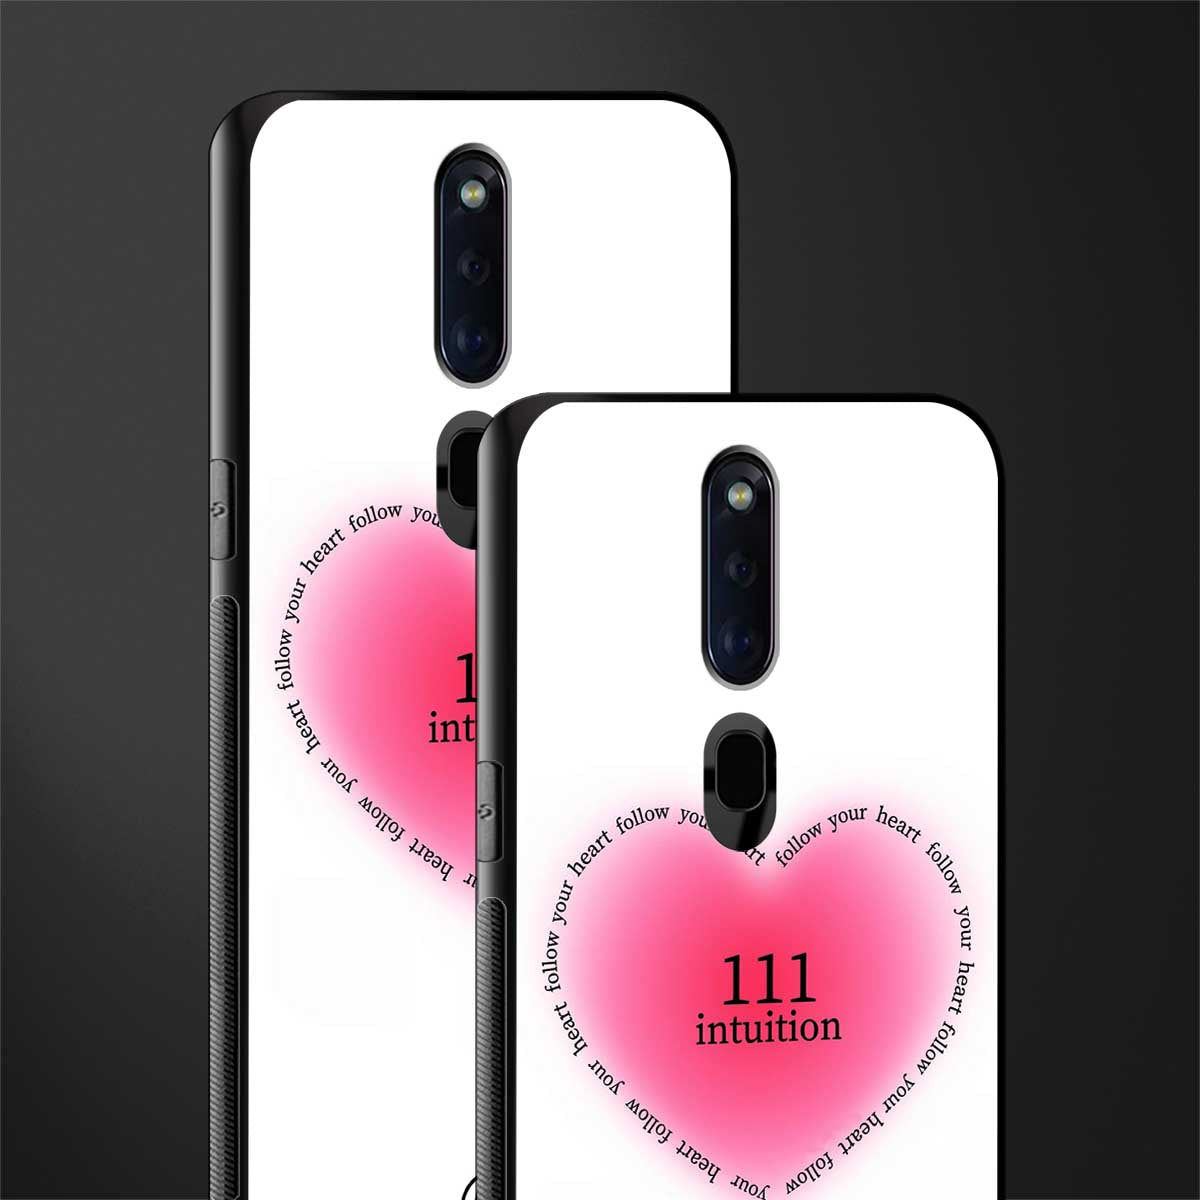 111 intuition glass case for oppo f11 pro image-2